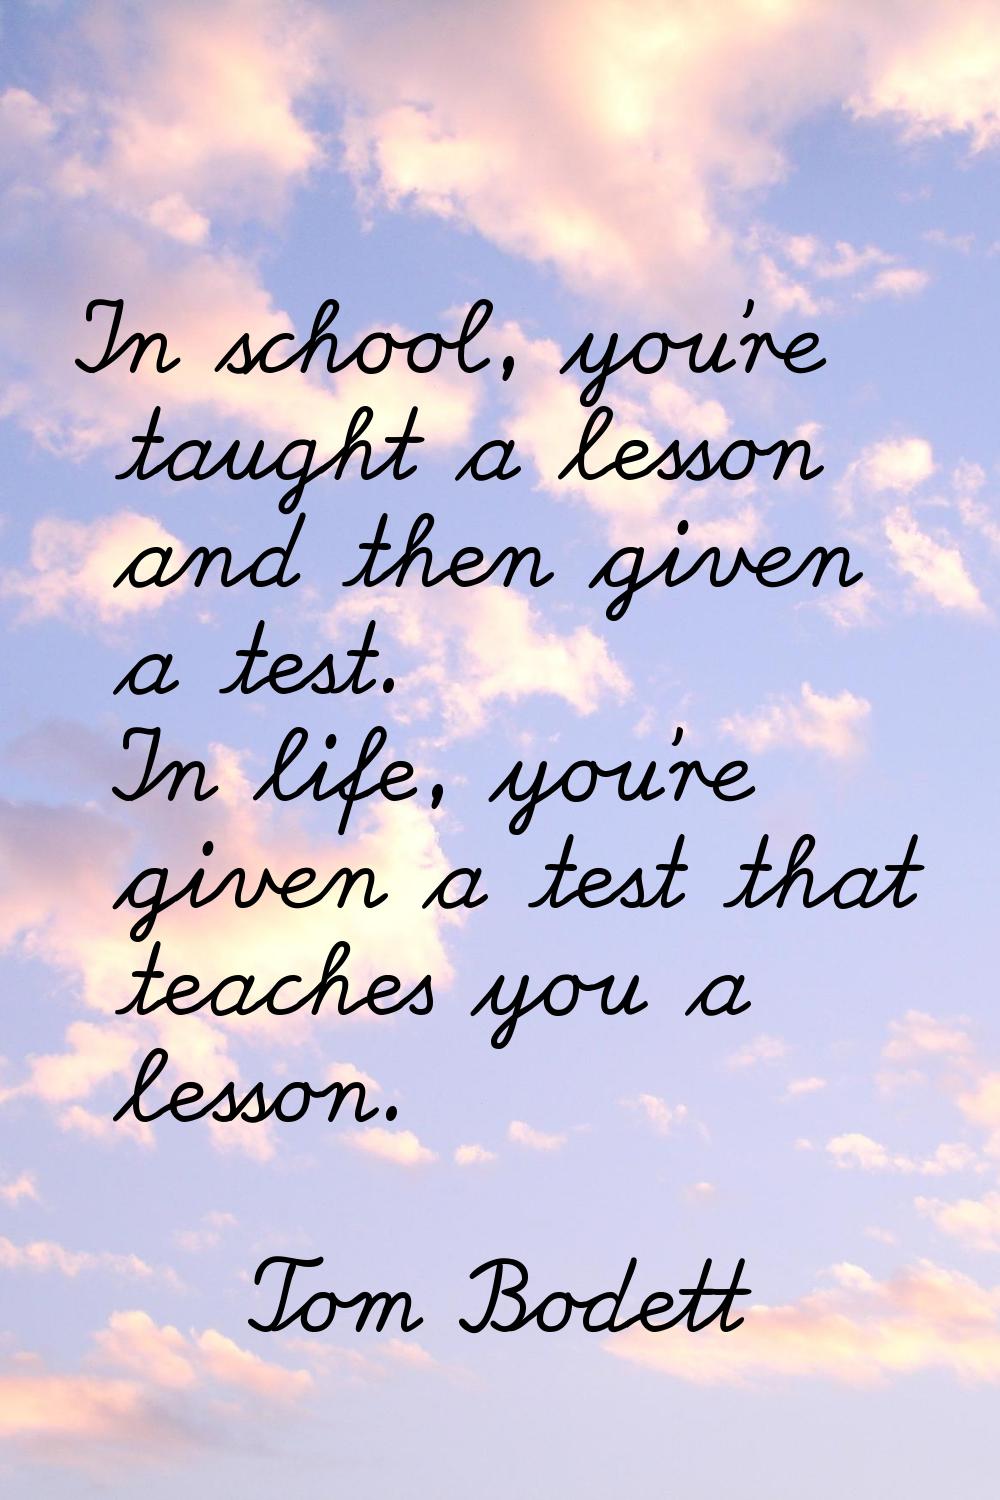 In school, you're taught a lesson and then given a test. In life, you're given a test that teaches 